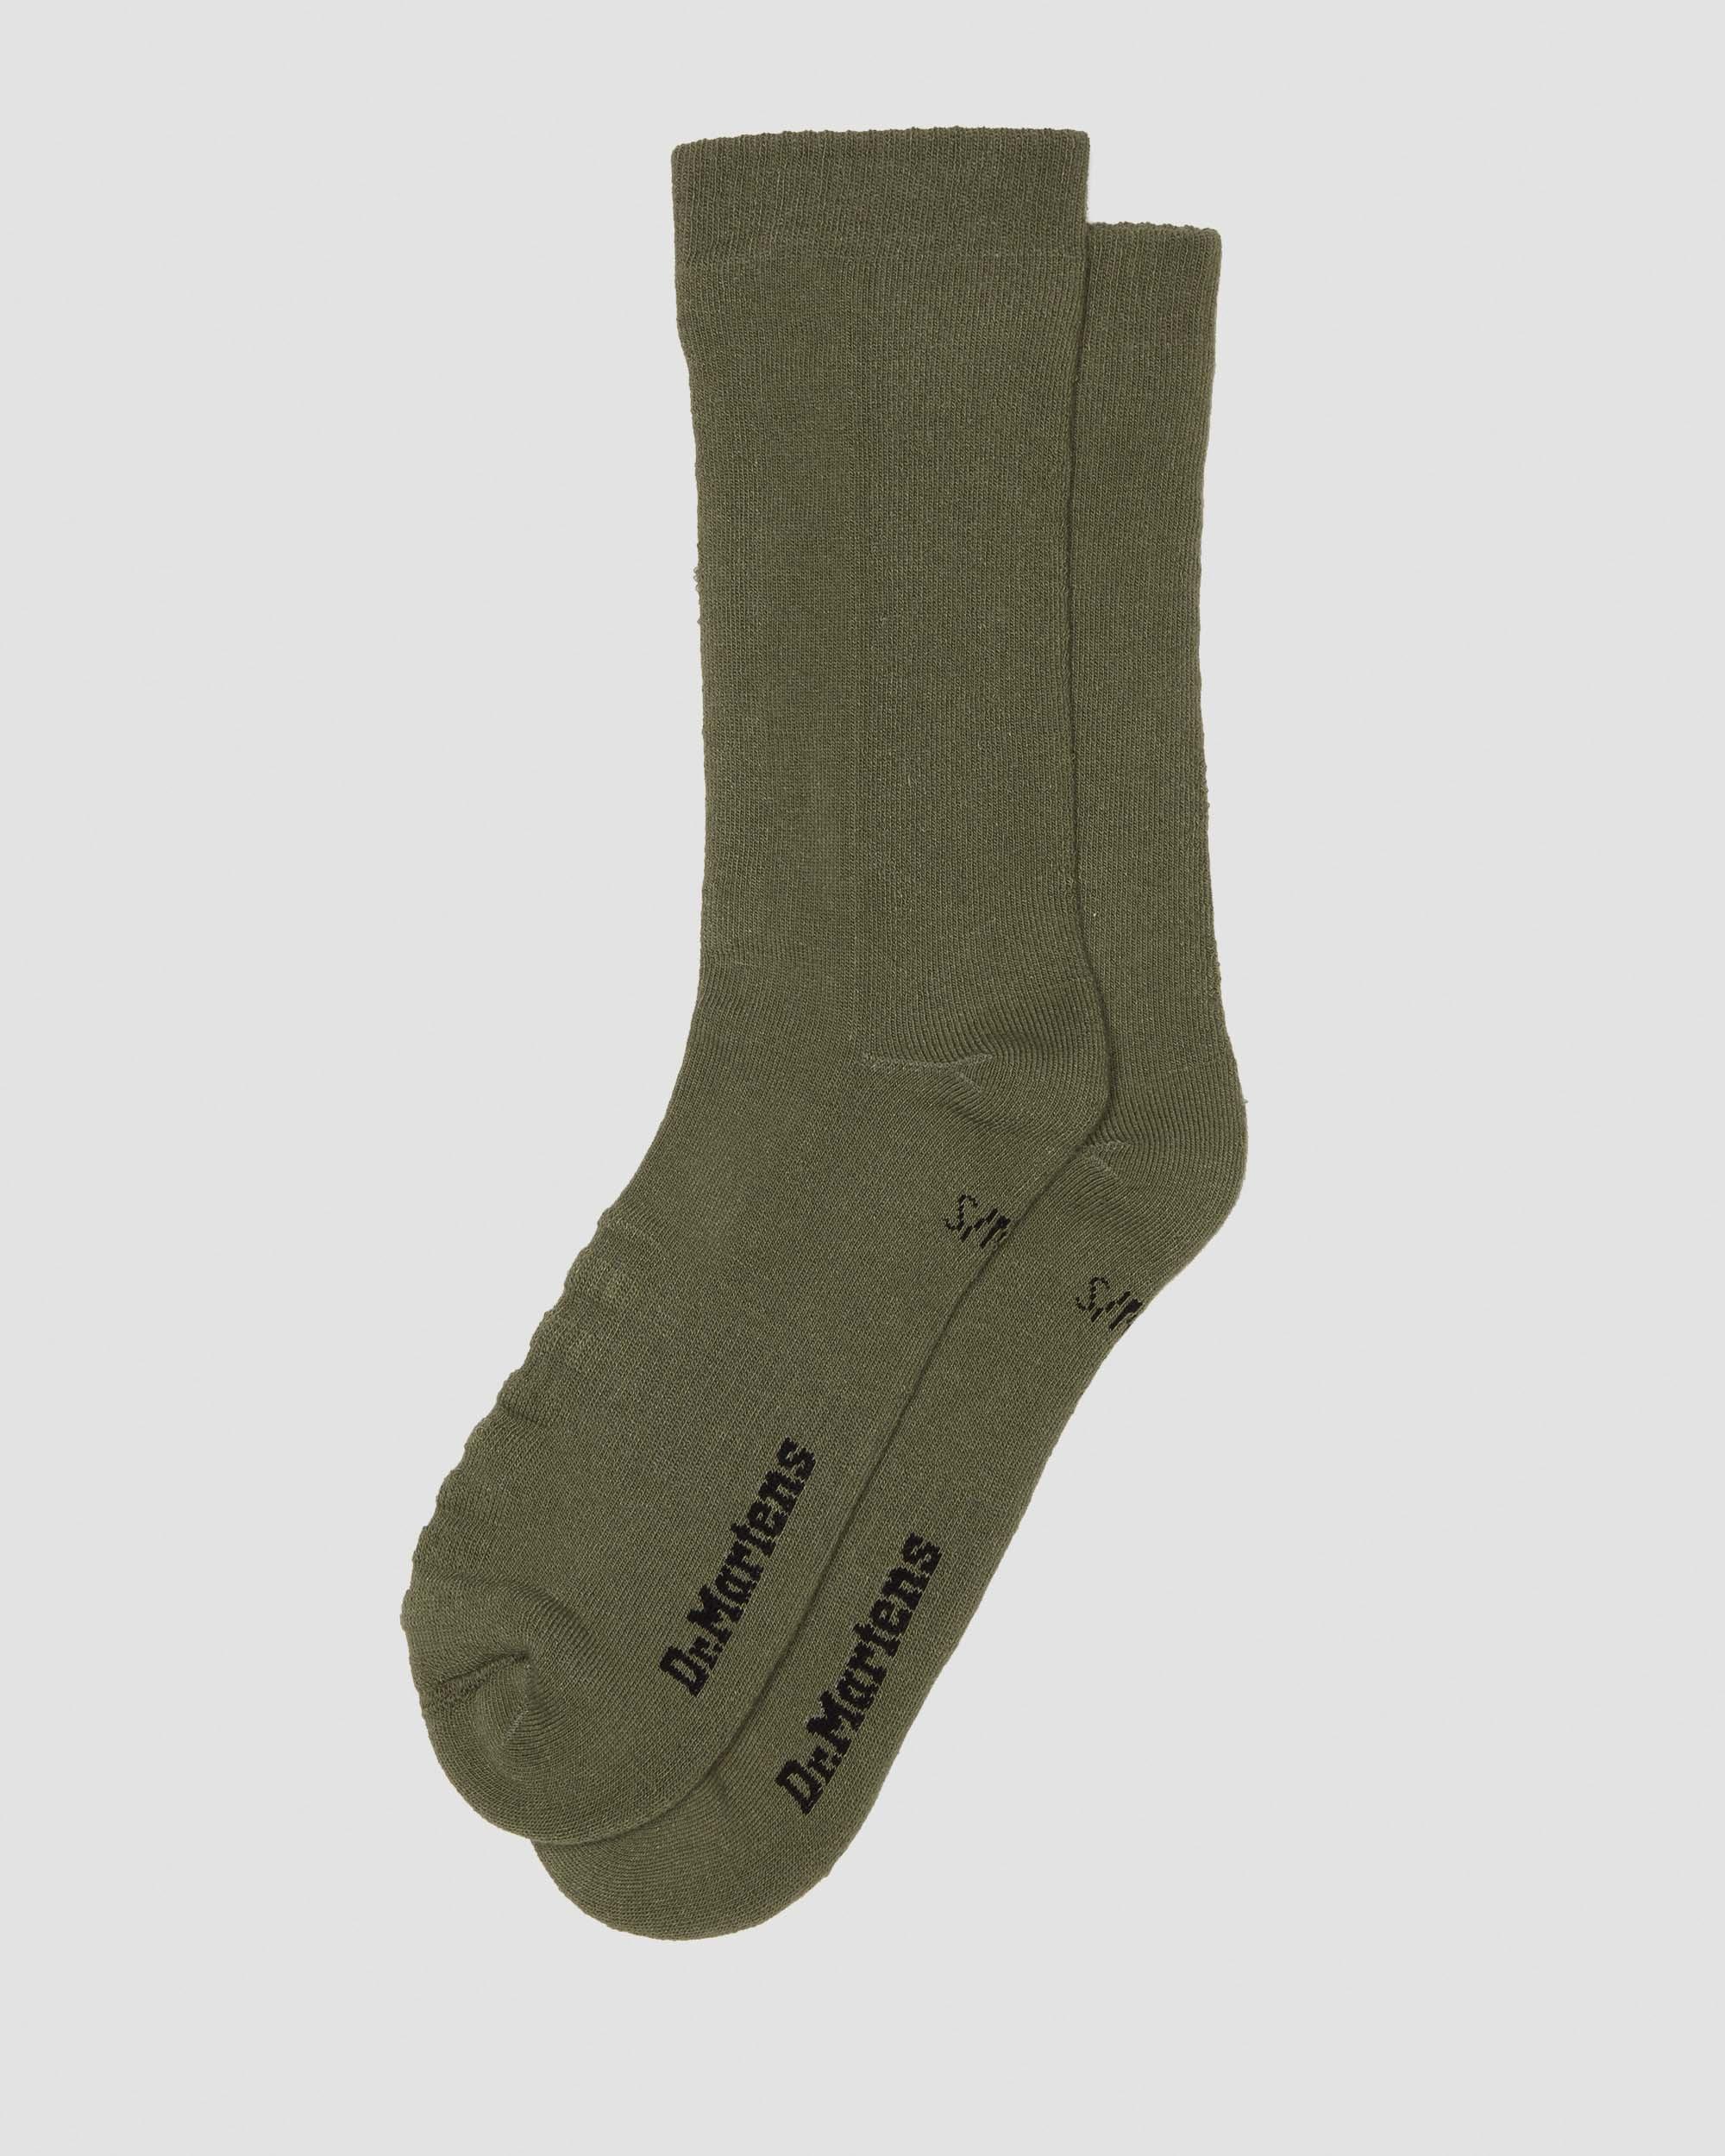 Double Doc Cotton Blend Socks in Muted Olive | Dr. Martens